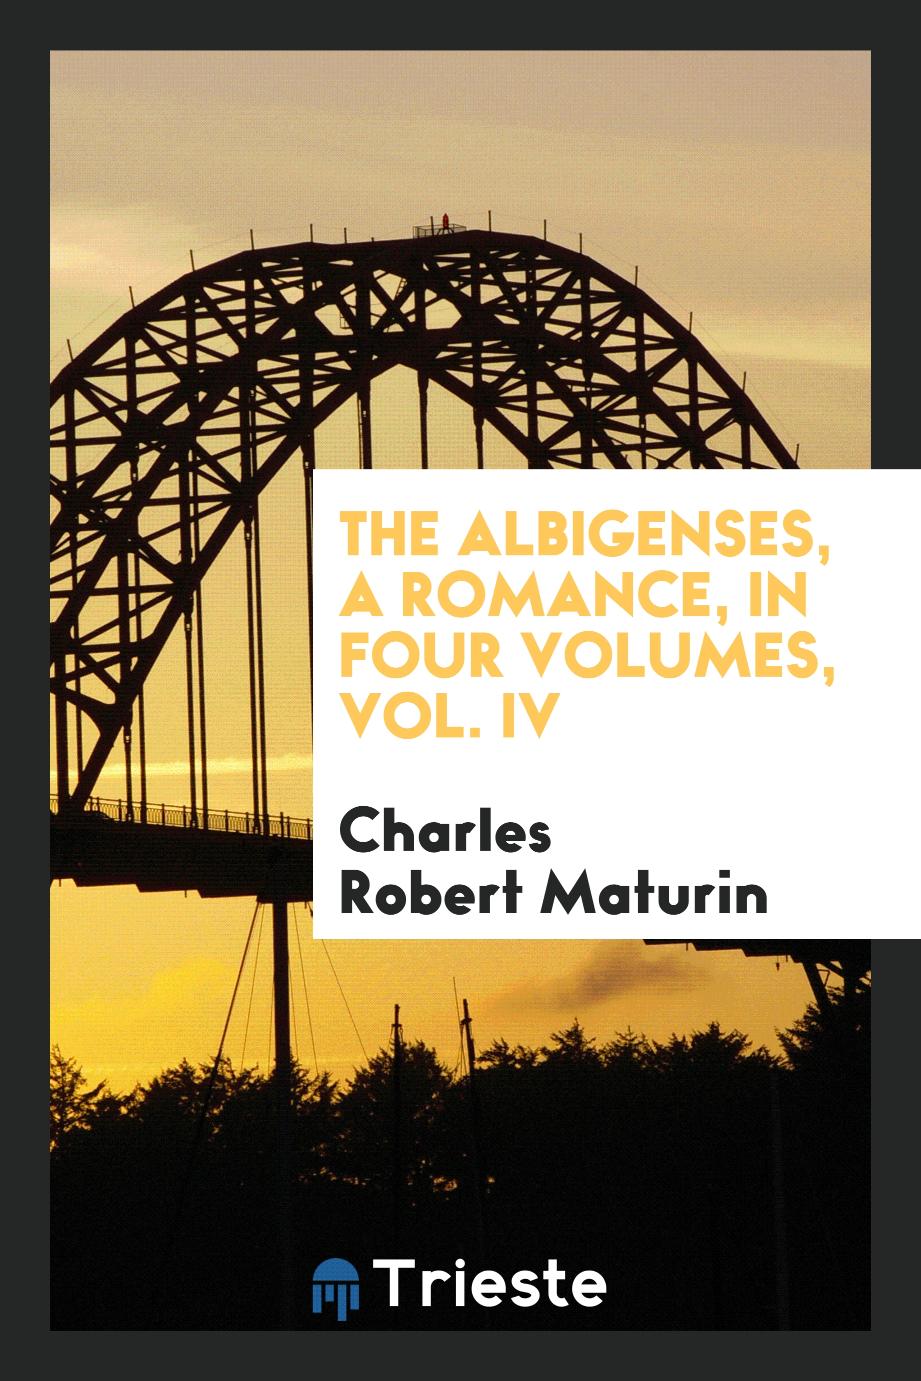 Charles Robert Maturin - The Albigenses, a romance, in four volumes, Vol. IV